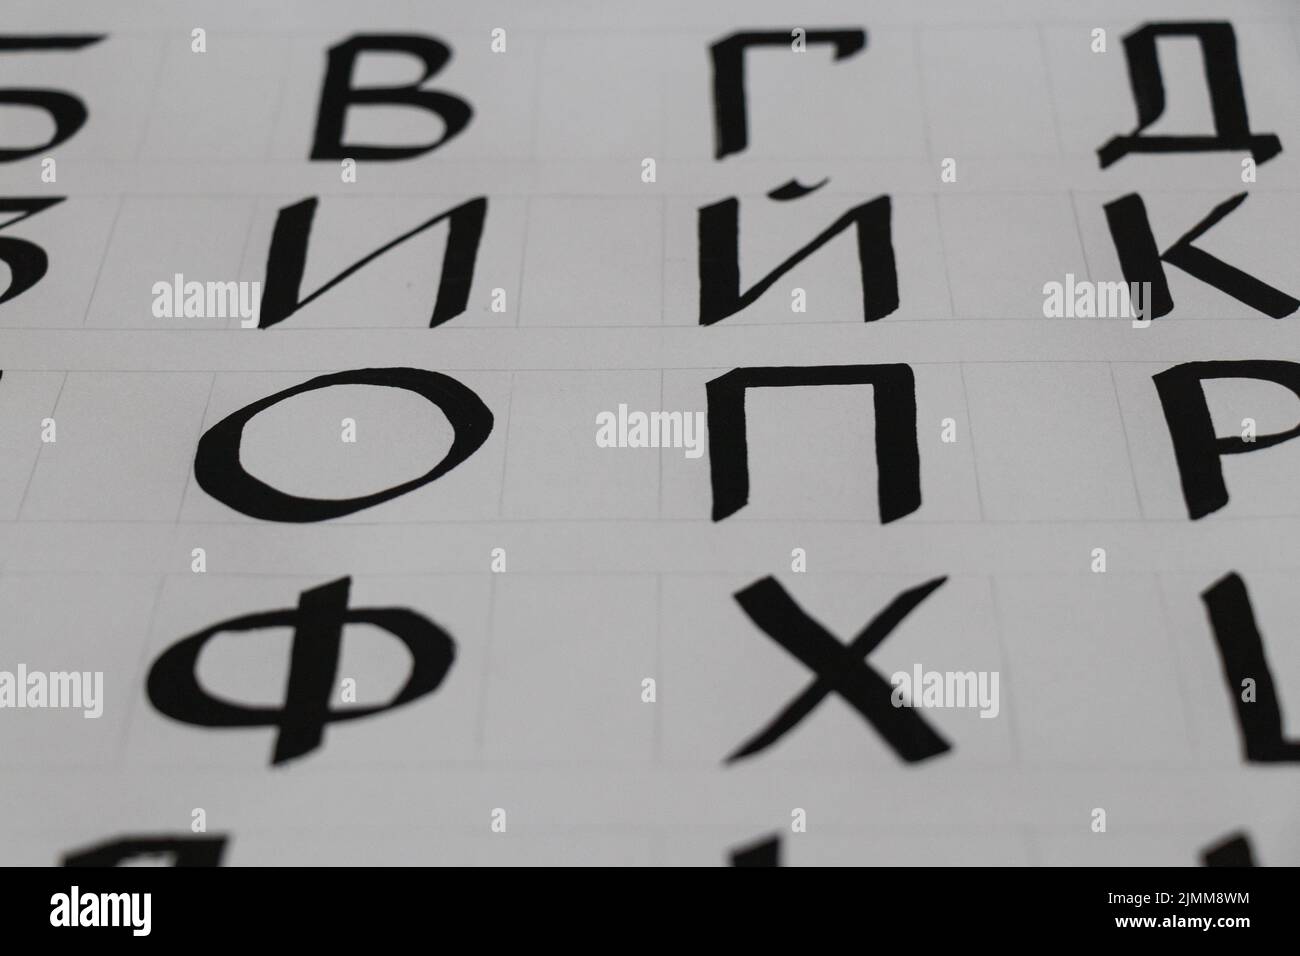 Composition of Cyrillic fonts text Stock Photo